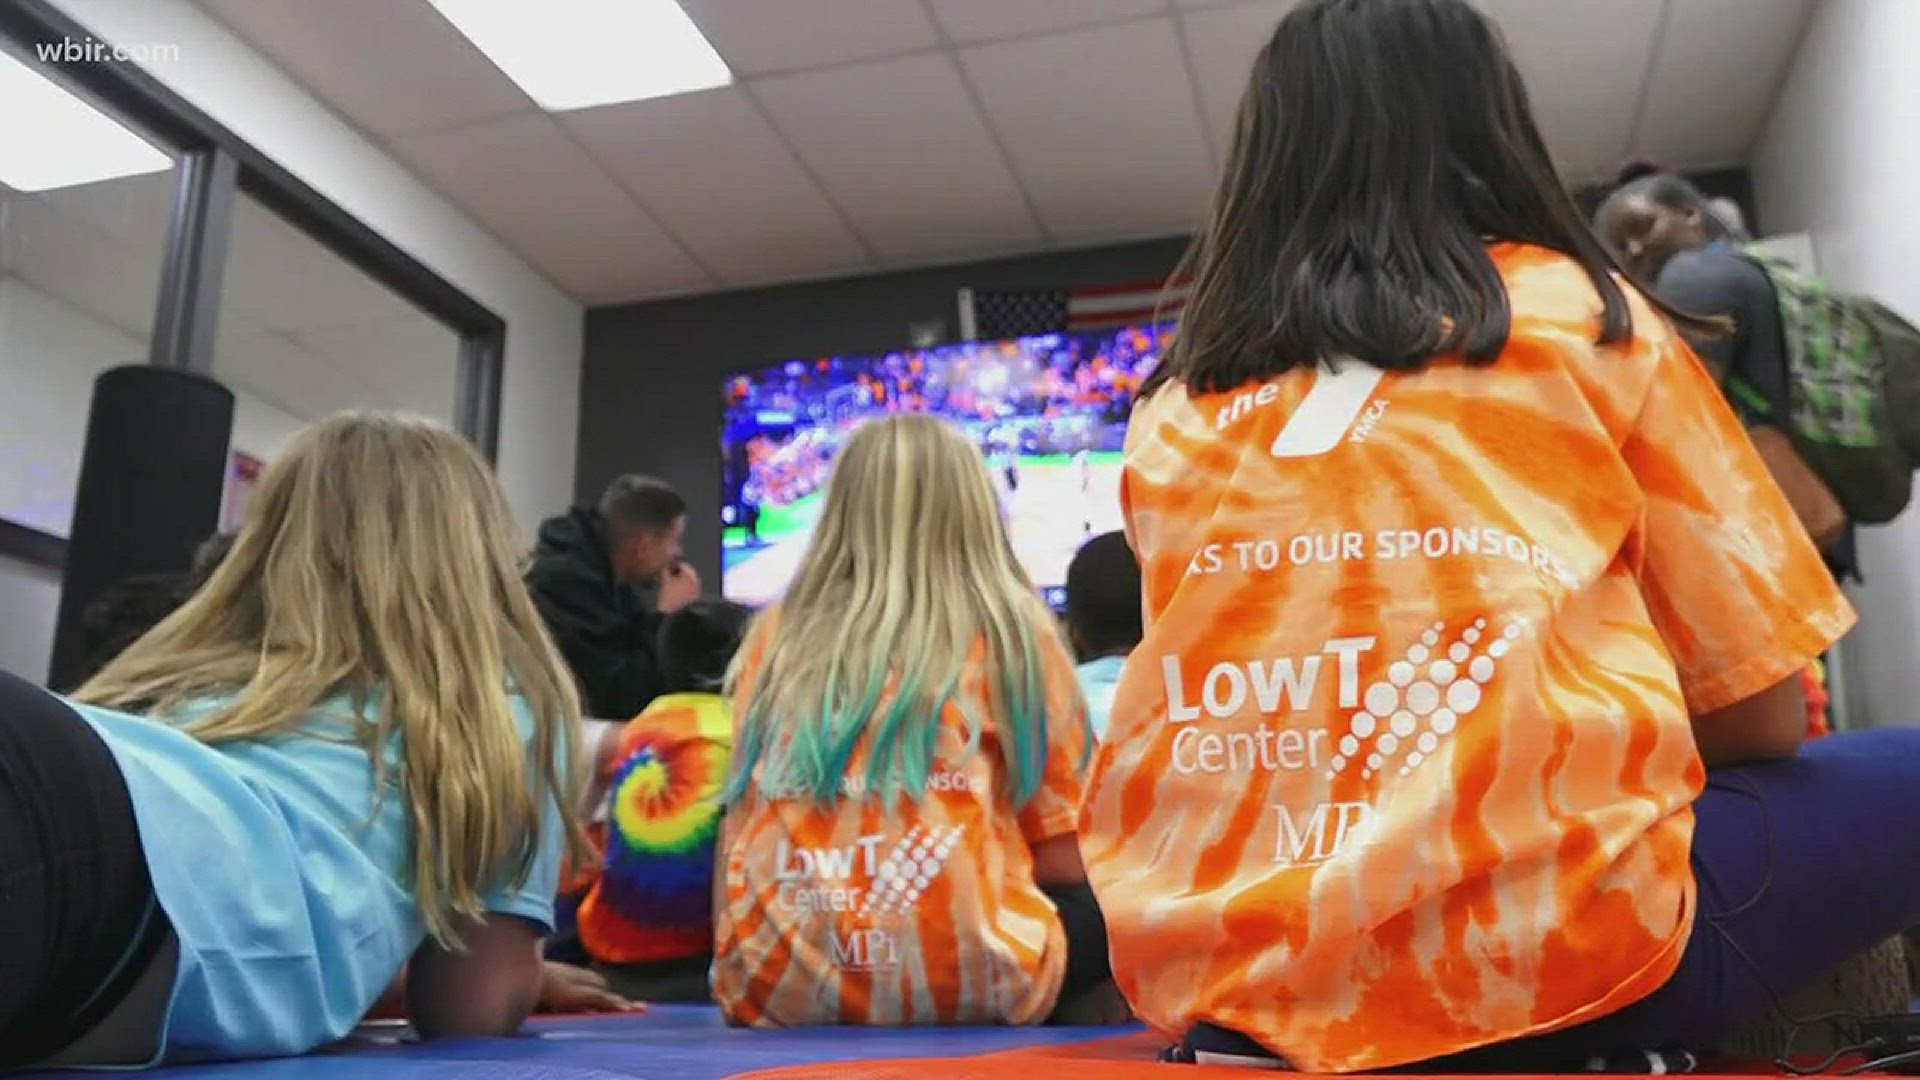 March 15, 2018: Some of the smallest Vol fans gave the biggest reactions to the team's first-round NCAA tournament win.